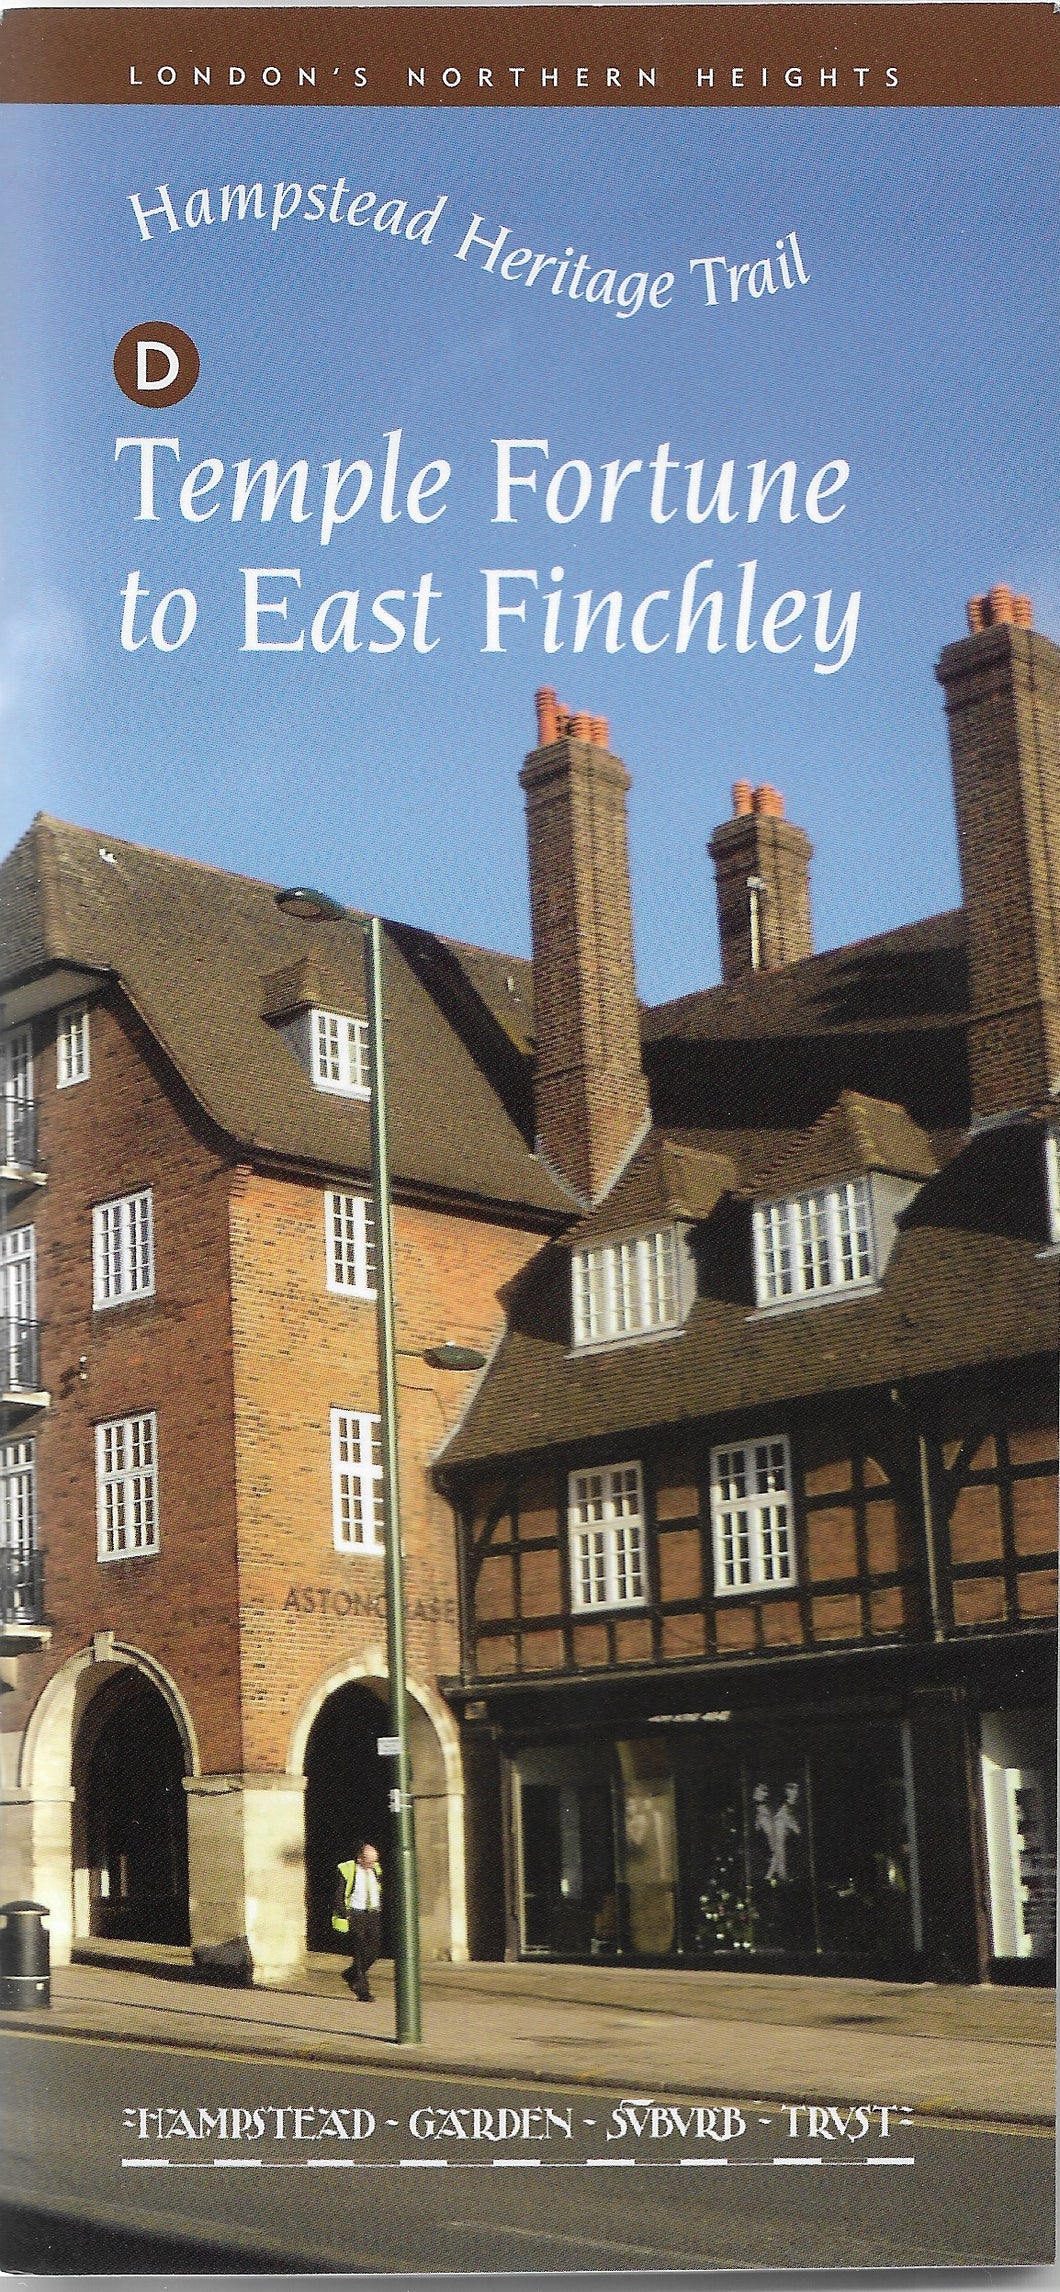 Guide - (D) Temple Fortune to East Finchley